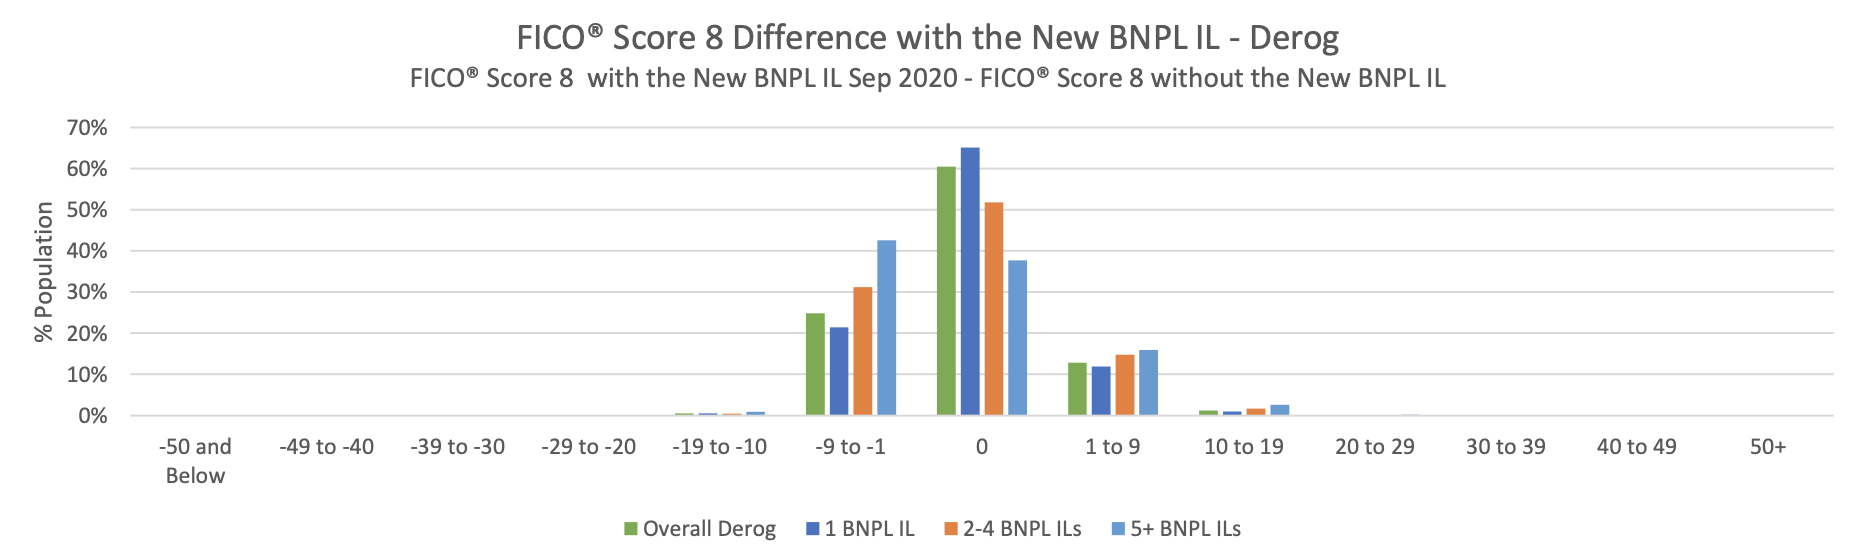 Distribution of FICO® Score 8 Difference with the New BNPL IL – Derog as of September 2020